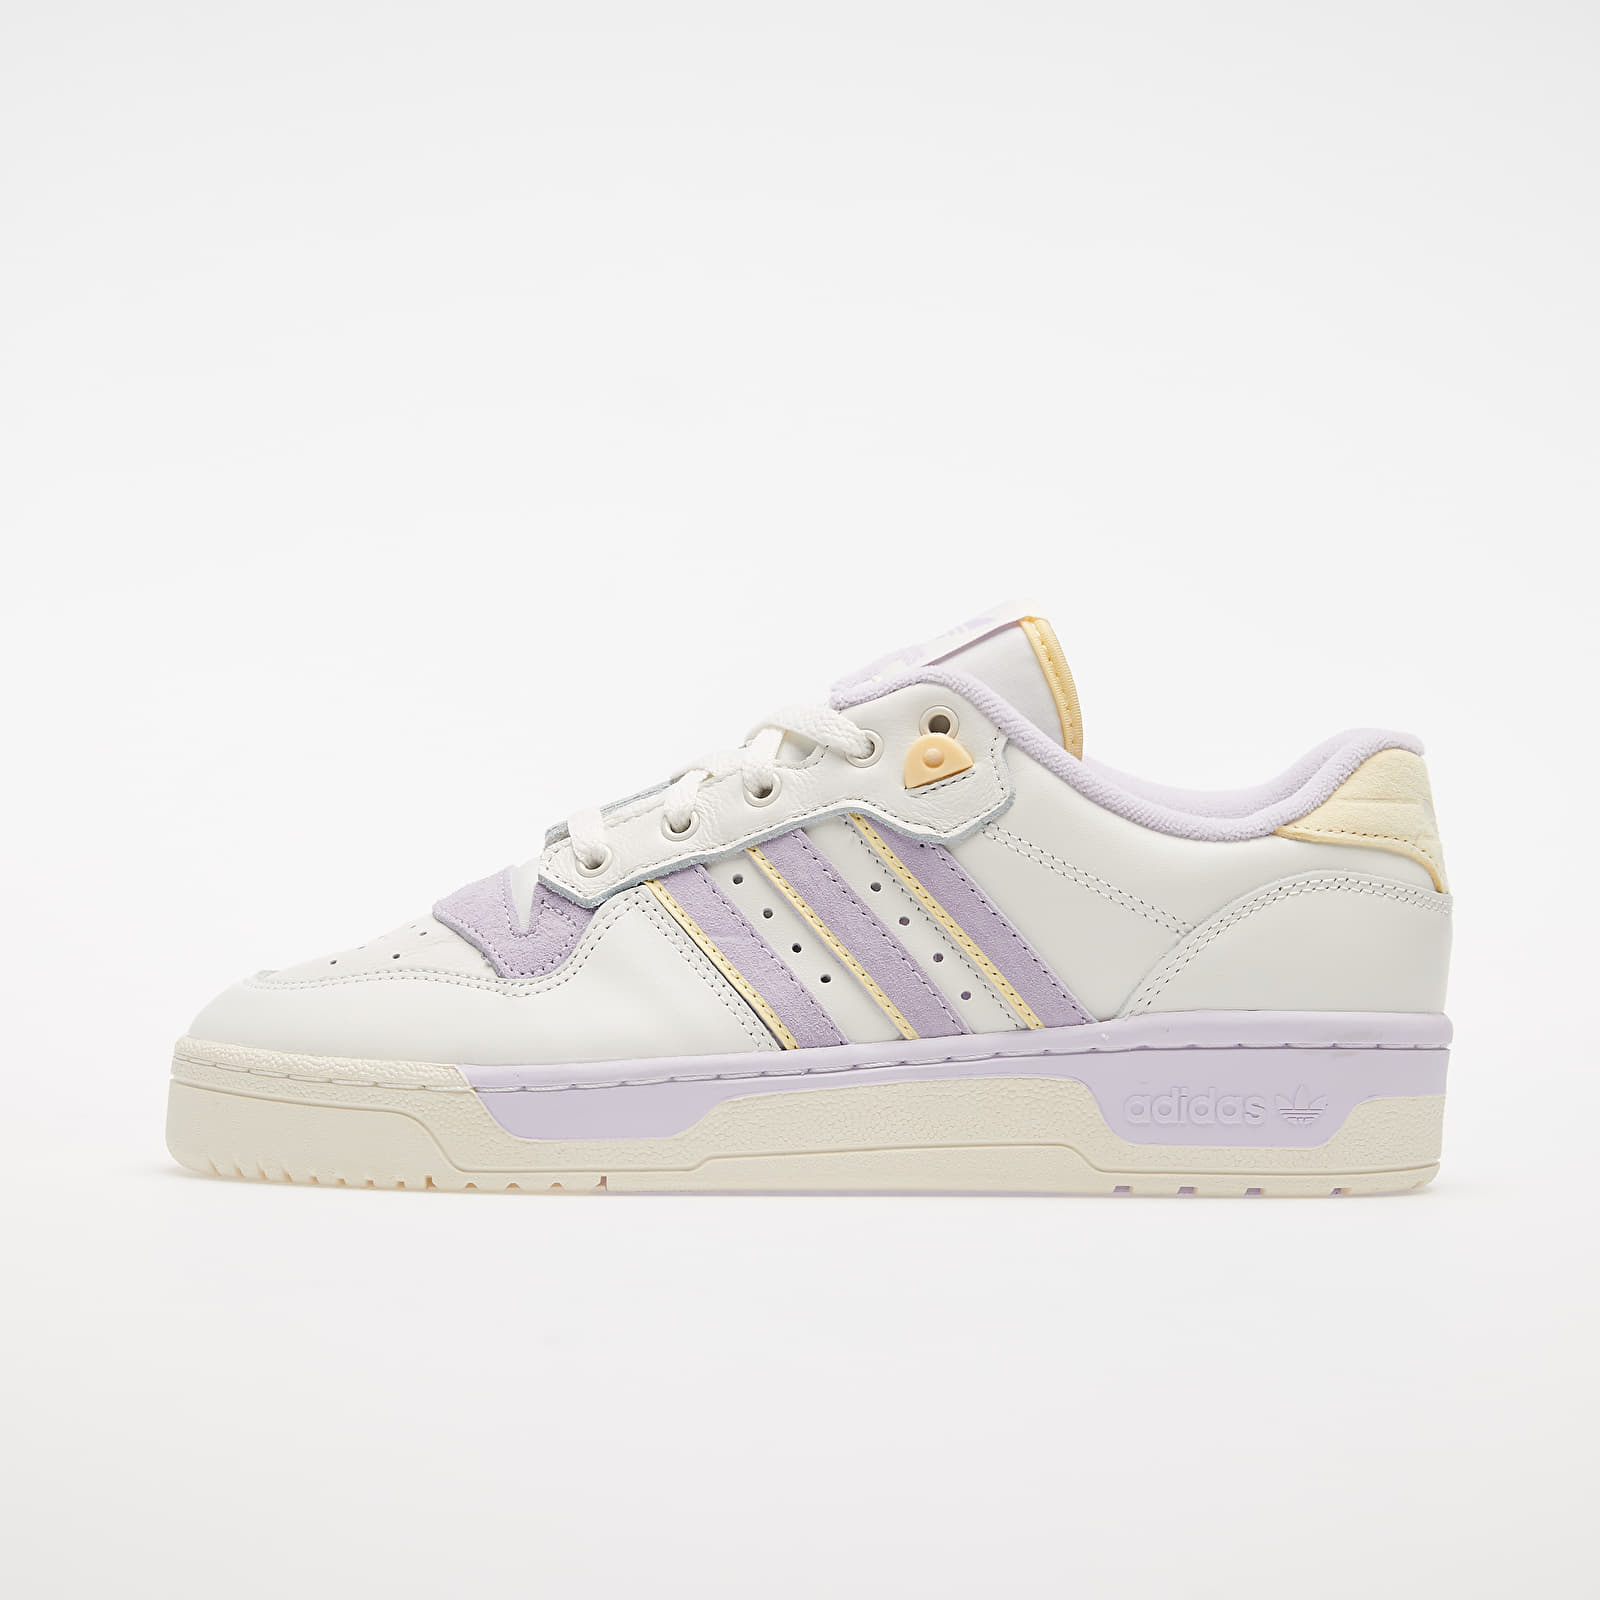 Men's shoes adidas Rivalry Low Cloud White/ Off White/ Purple Tint